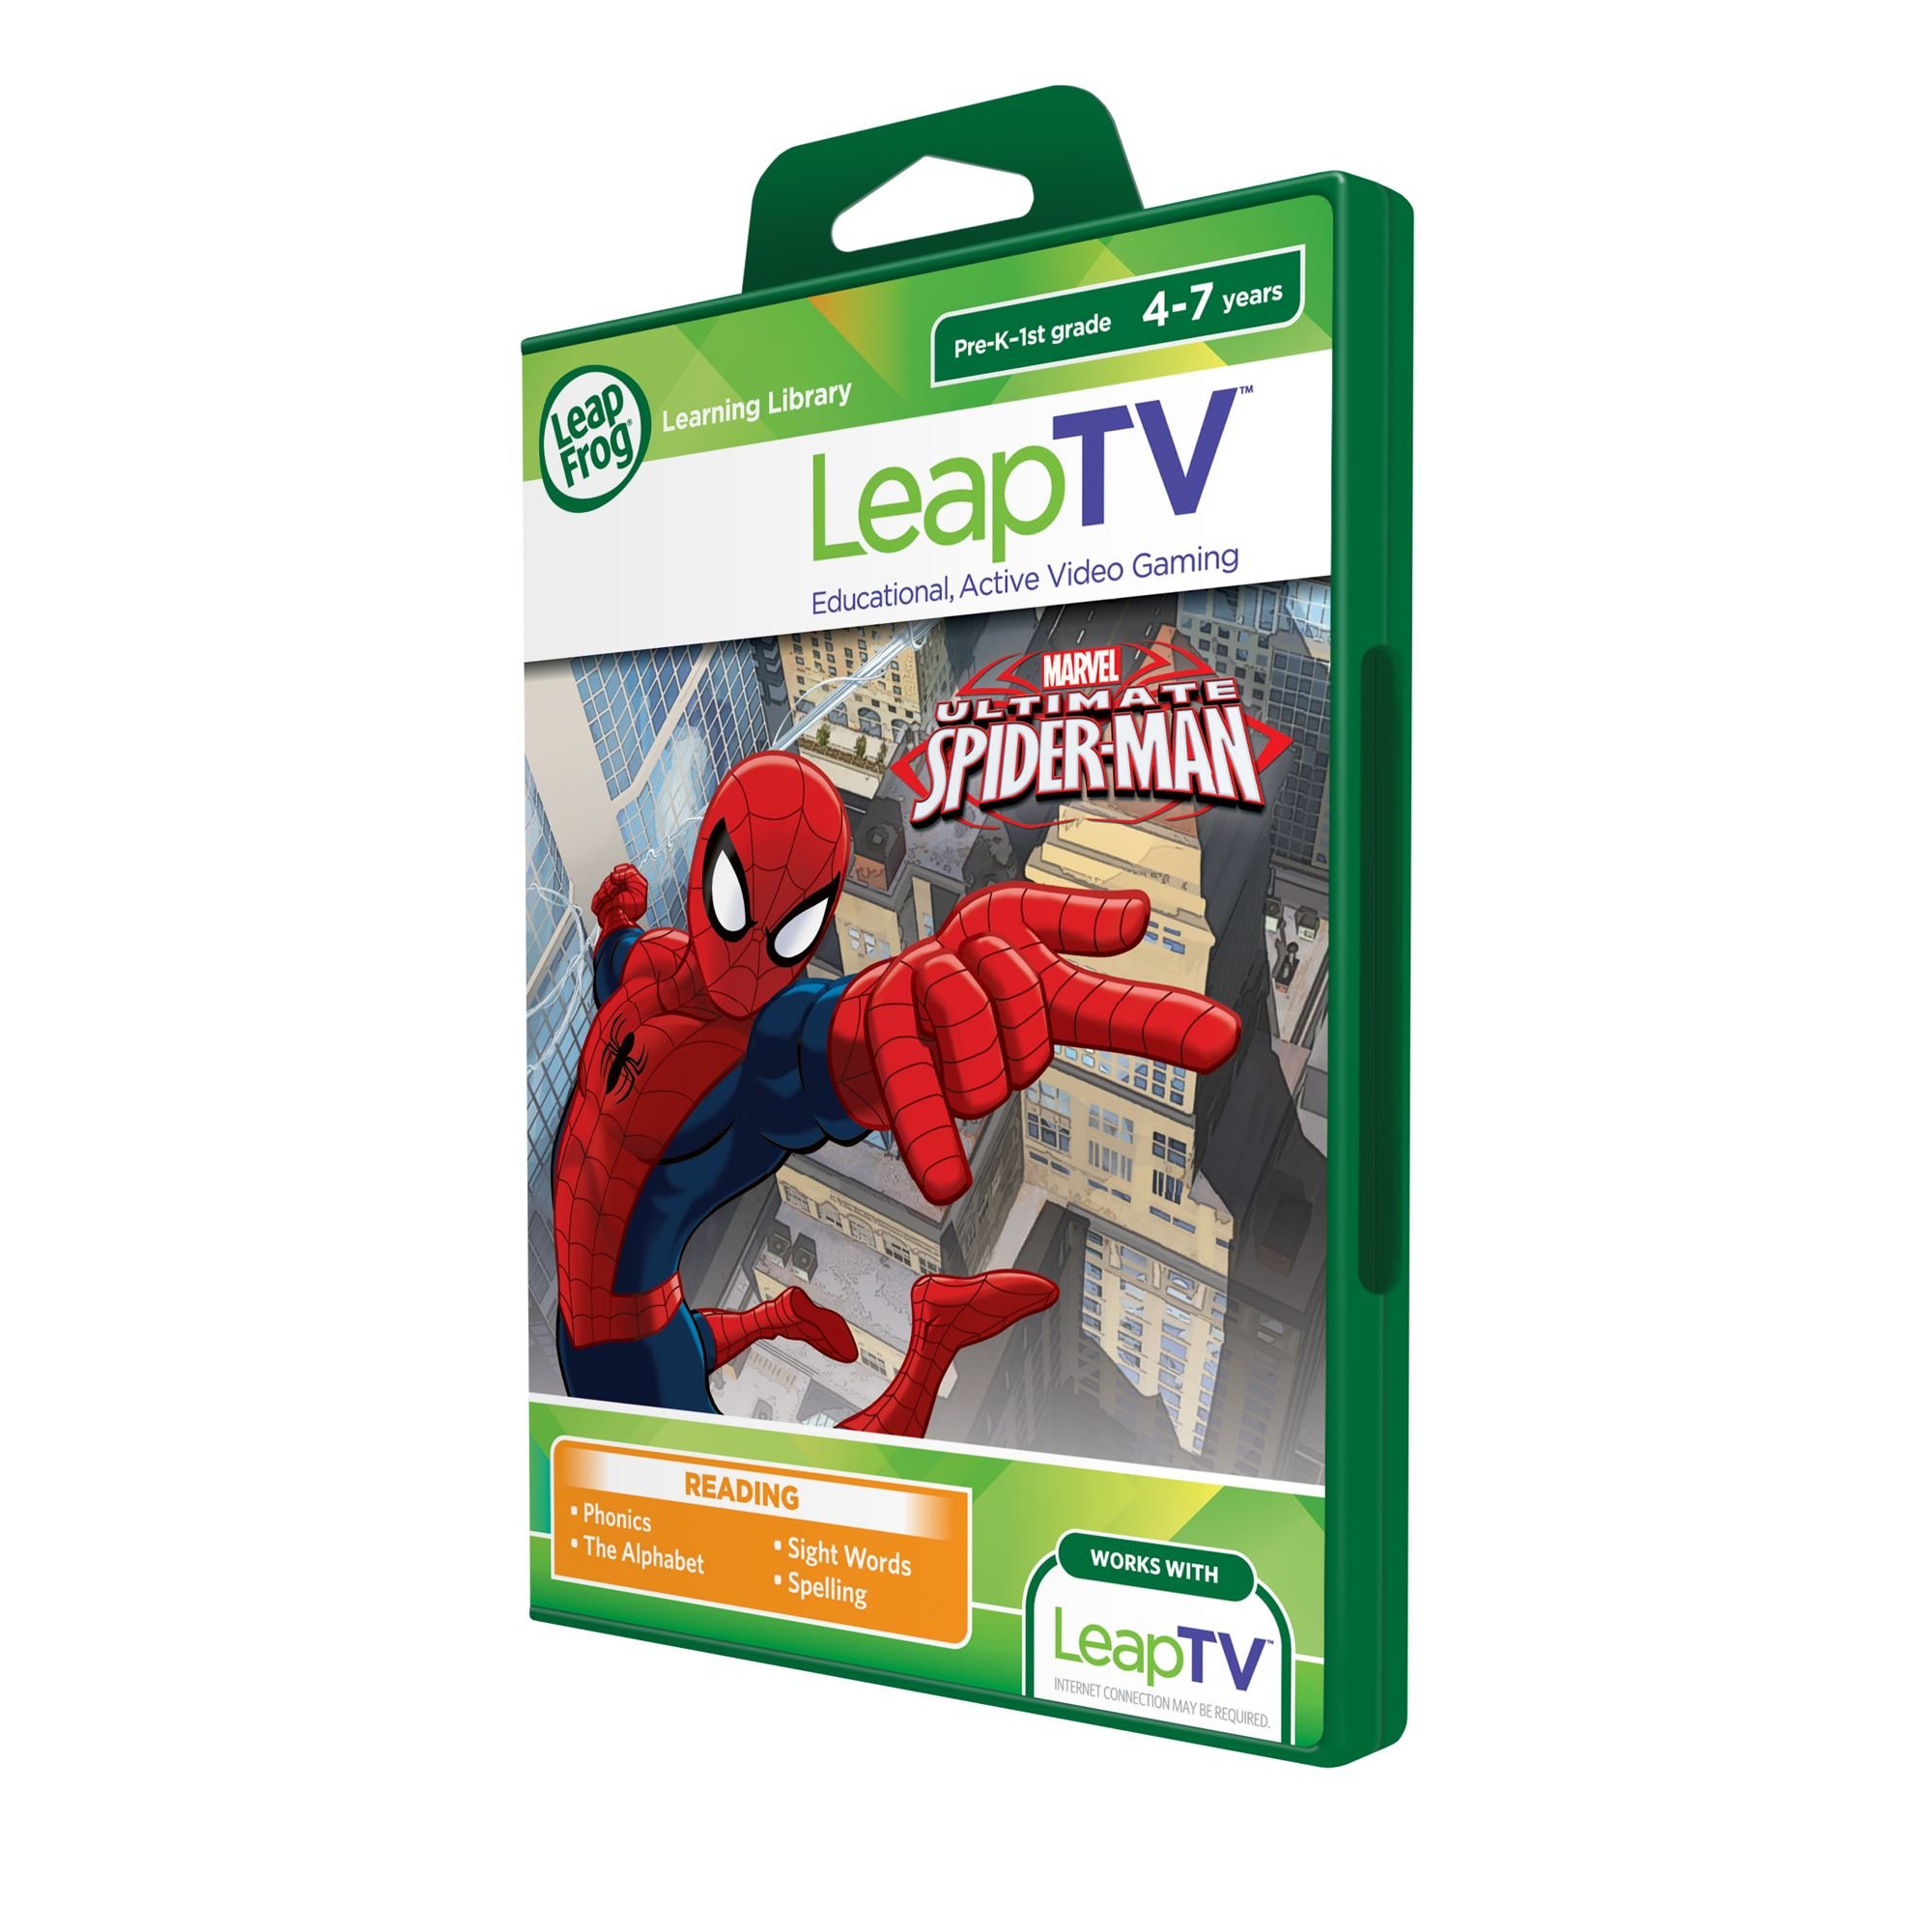 LeapFrog LeapTV Ultimate Spider-Man Educational, Active Video Game